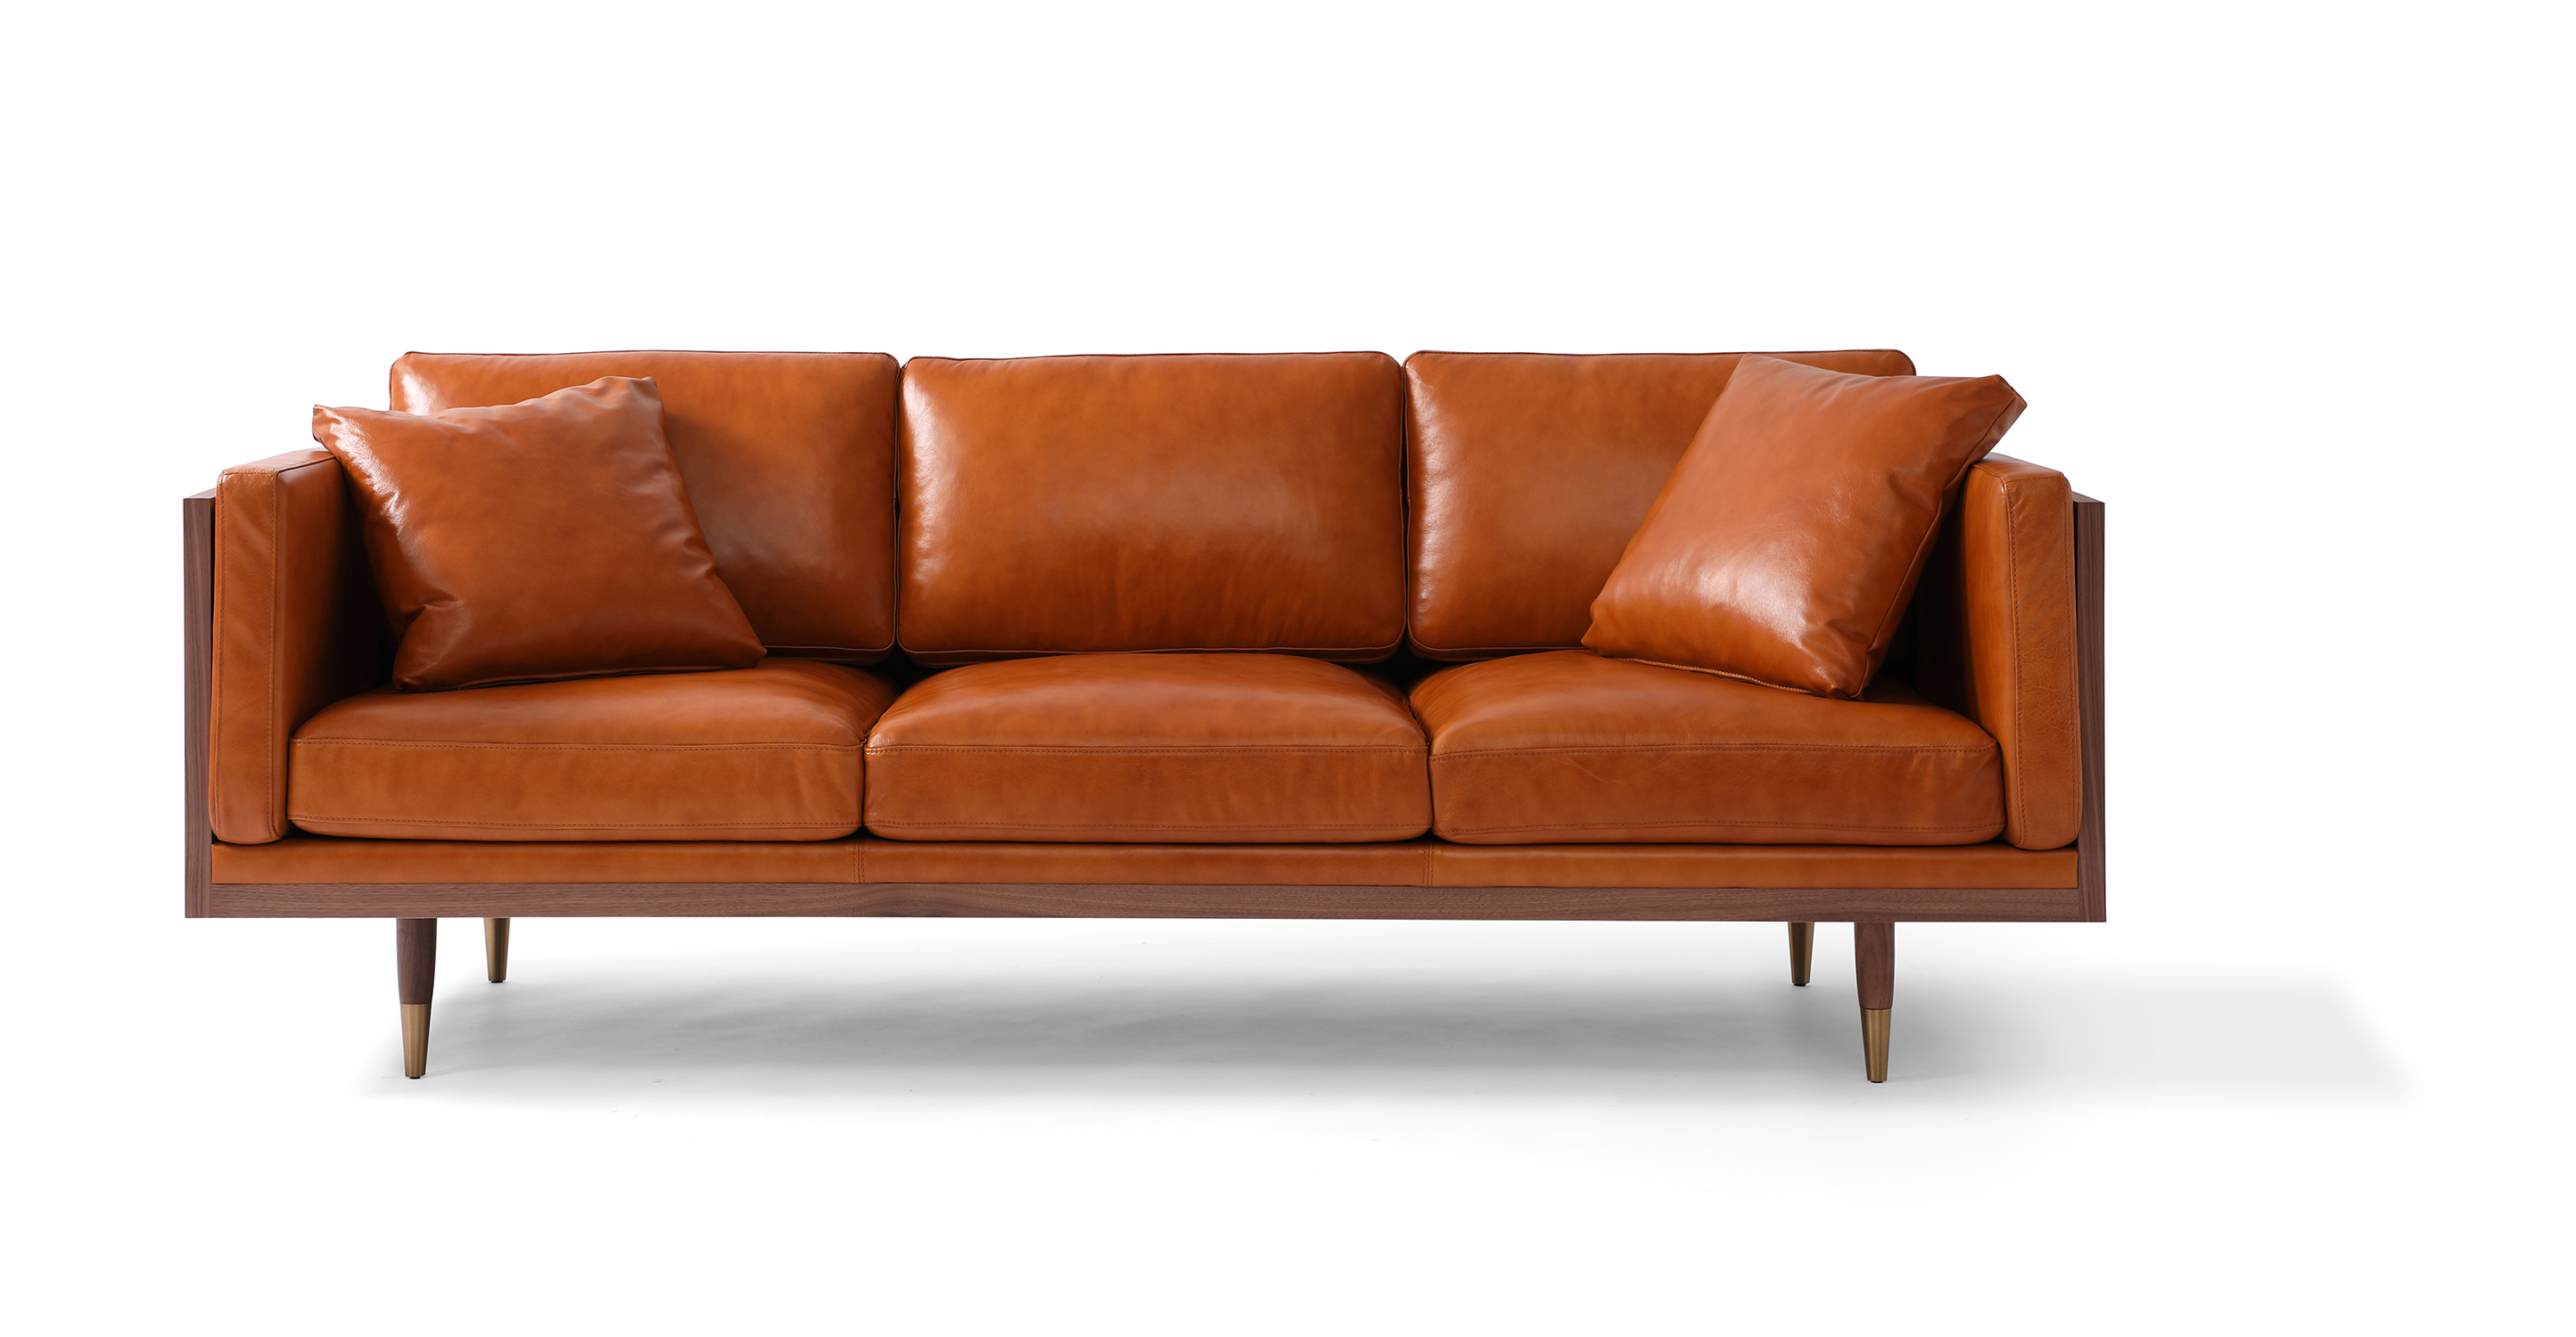 Woodrow Lush Tan leather is a walnut wood wrapped sofa. The top of the arms and back are all walnut wood rectangles, creating a box shape. The interior of the sofa back and seat are each three smooth removable cushions. The arms have rectangle cushions that slip between the exterior wall of the sofa and the seat cushion to create a tight and comfortable arm. The legs are matching walnut wood, tapered, and brass tipped.